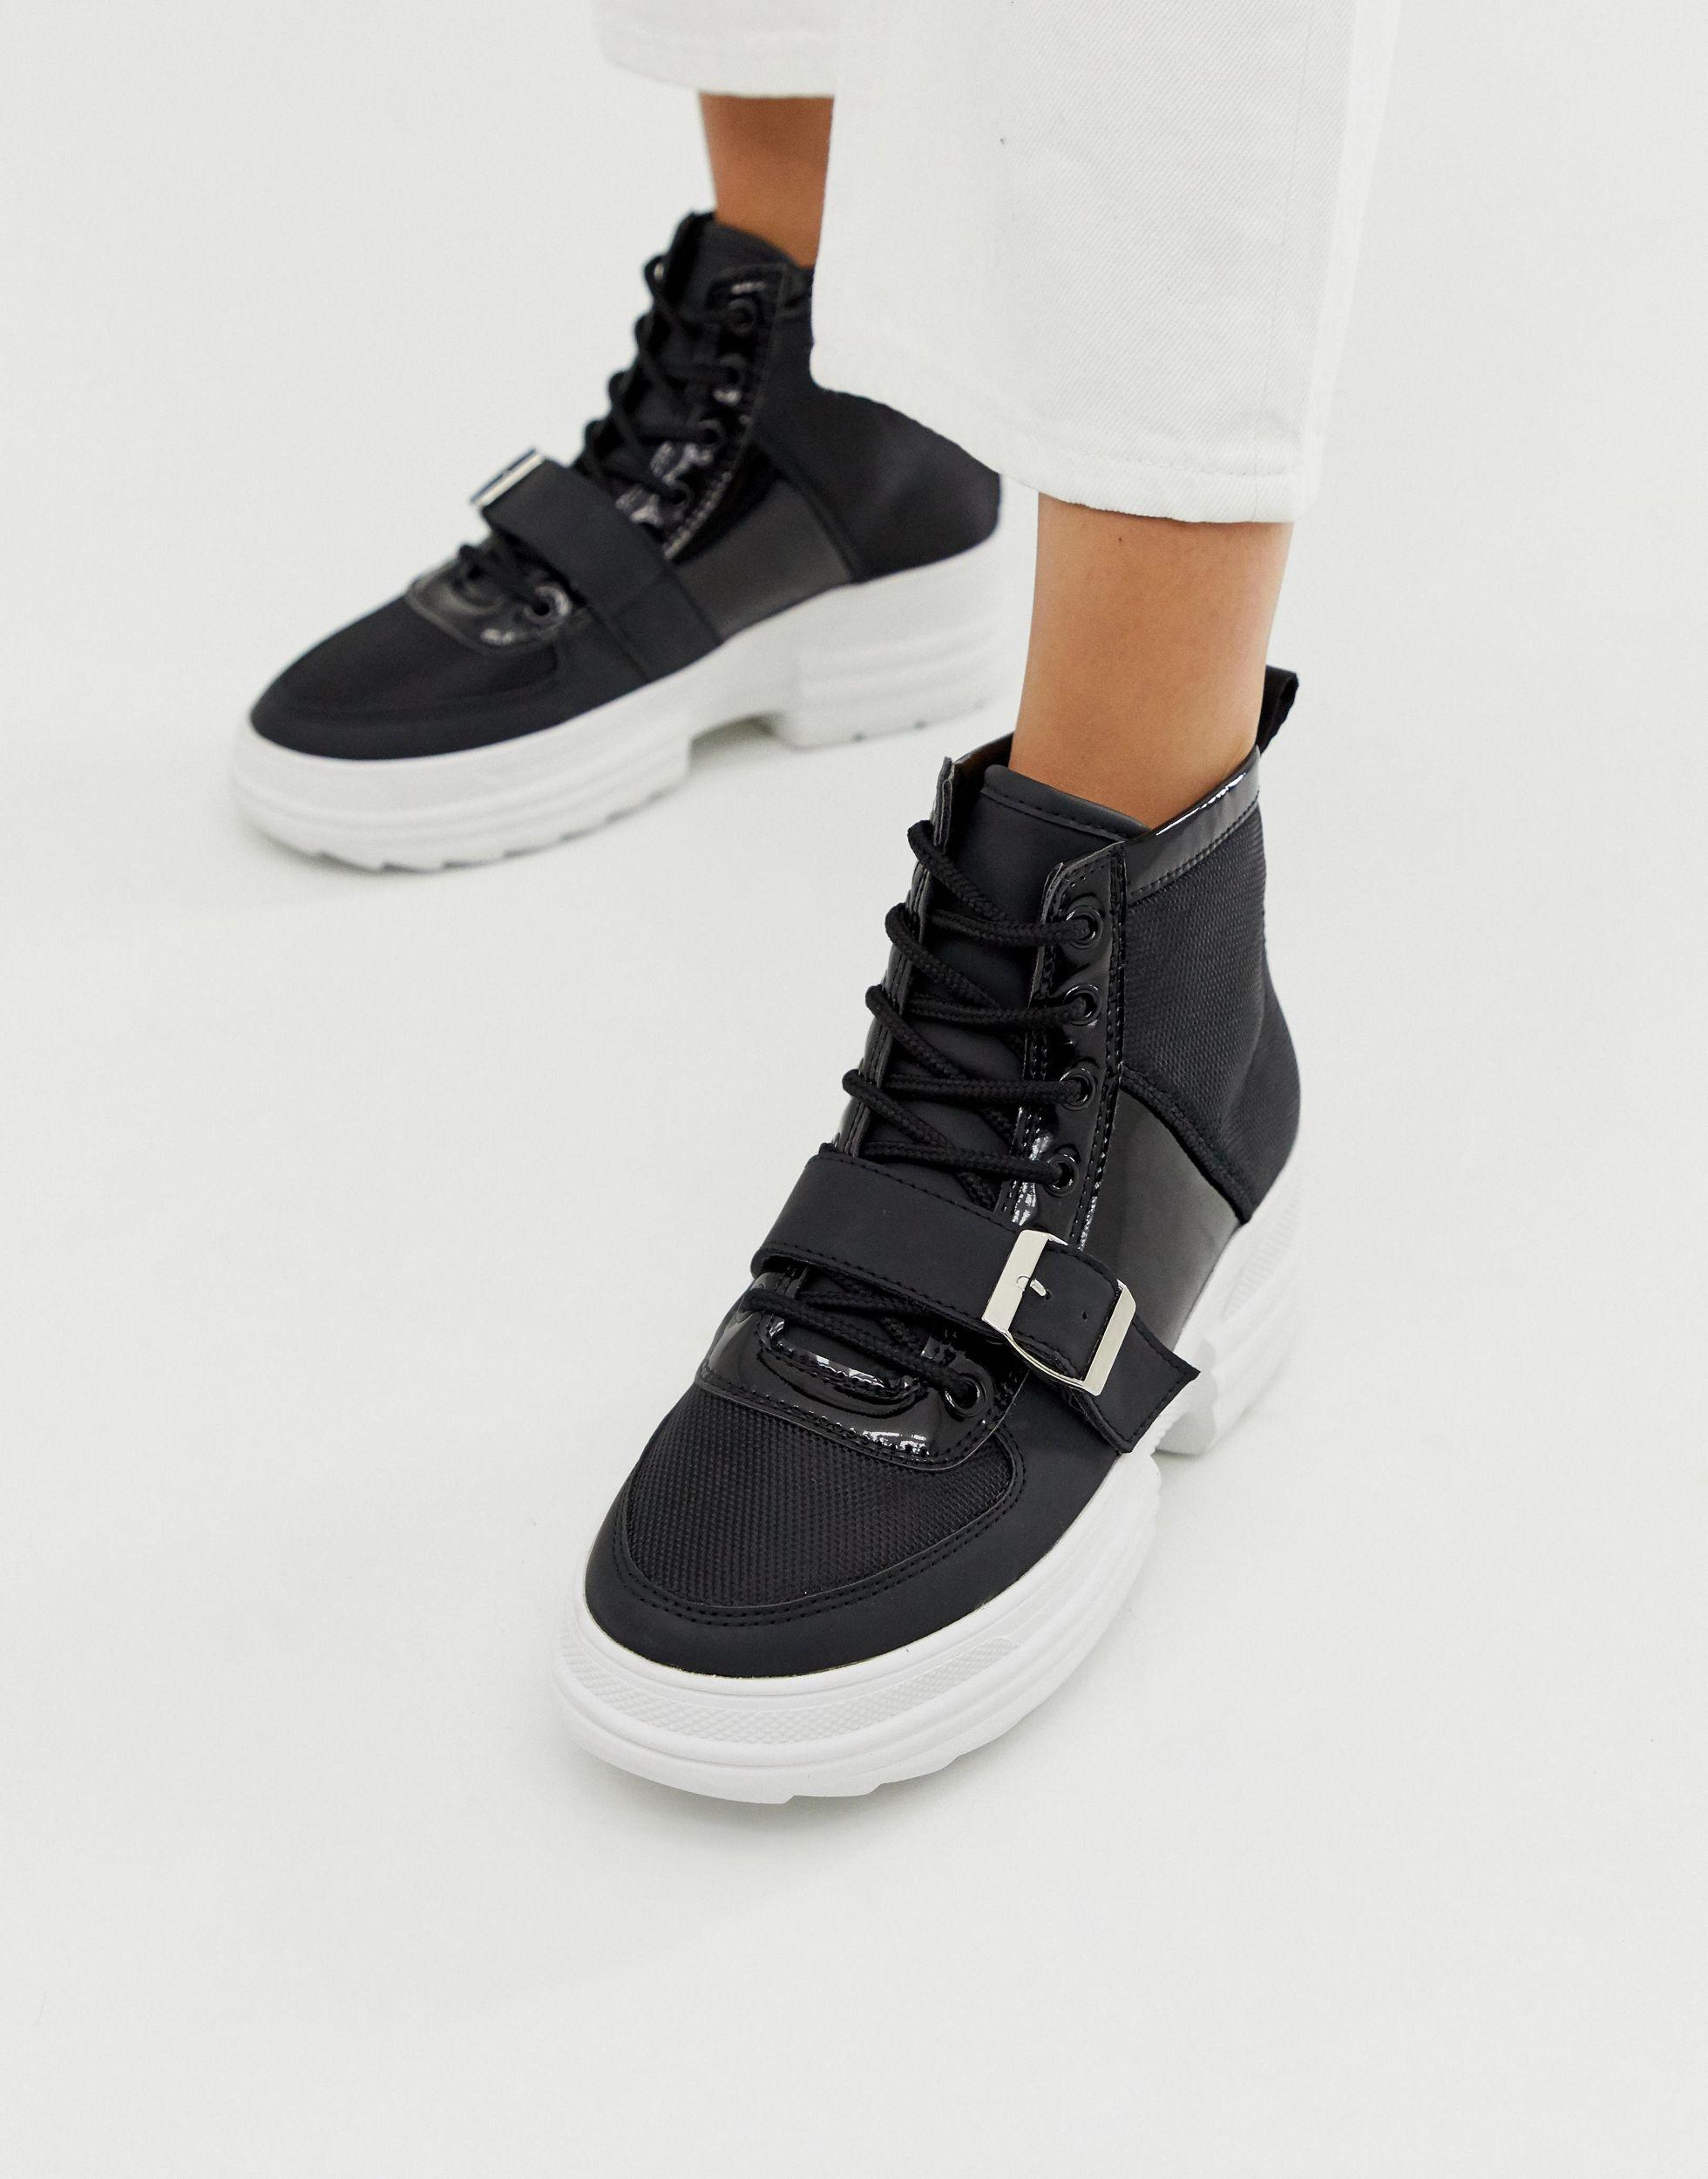 ASOS Discover Chunky Hi Top Trainers in Black - Lyst